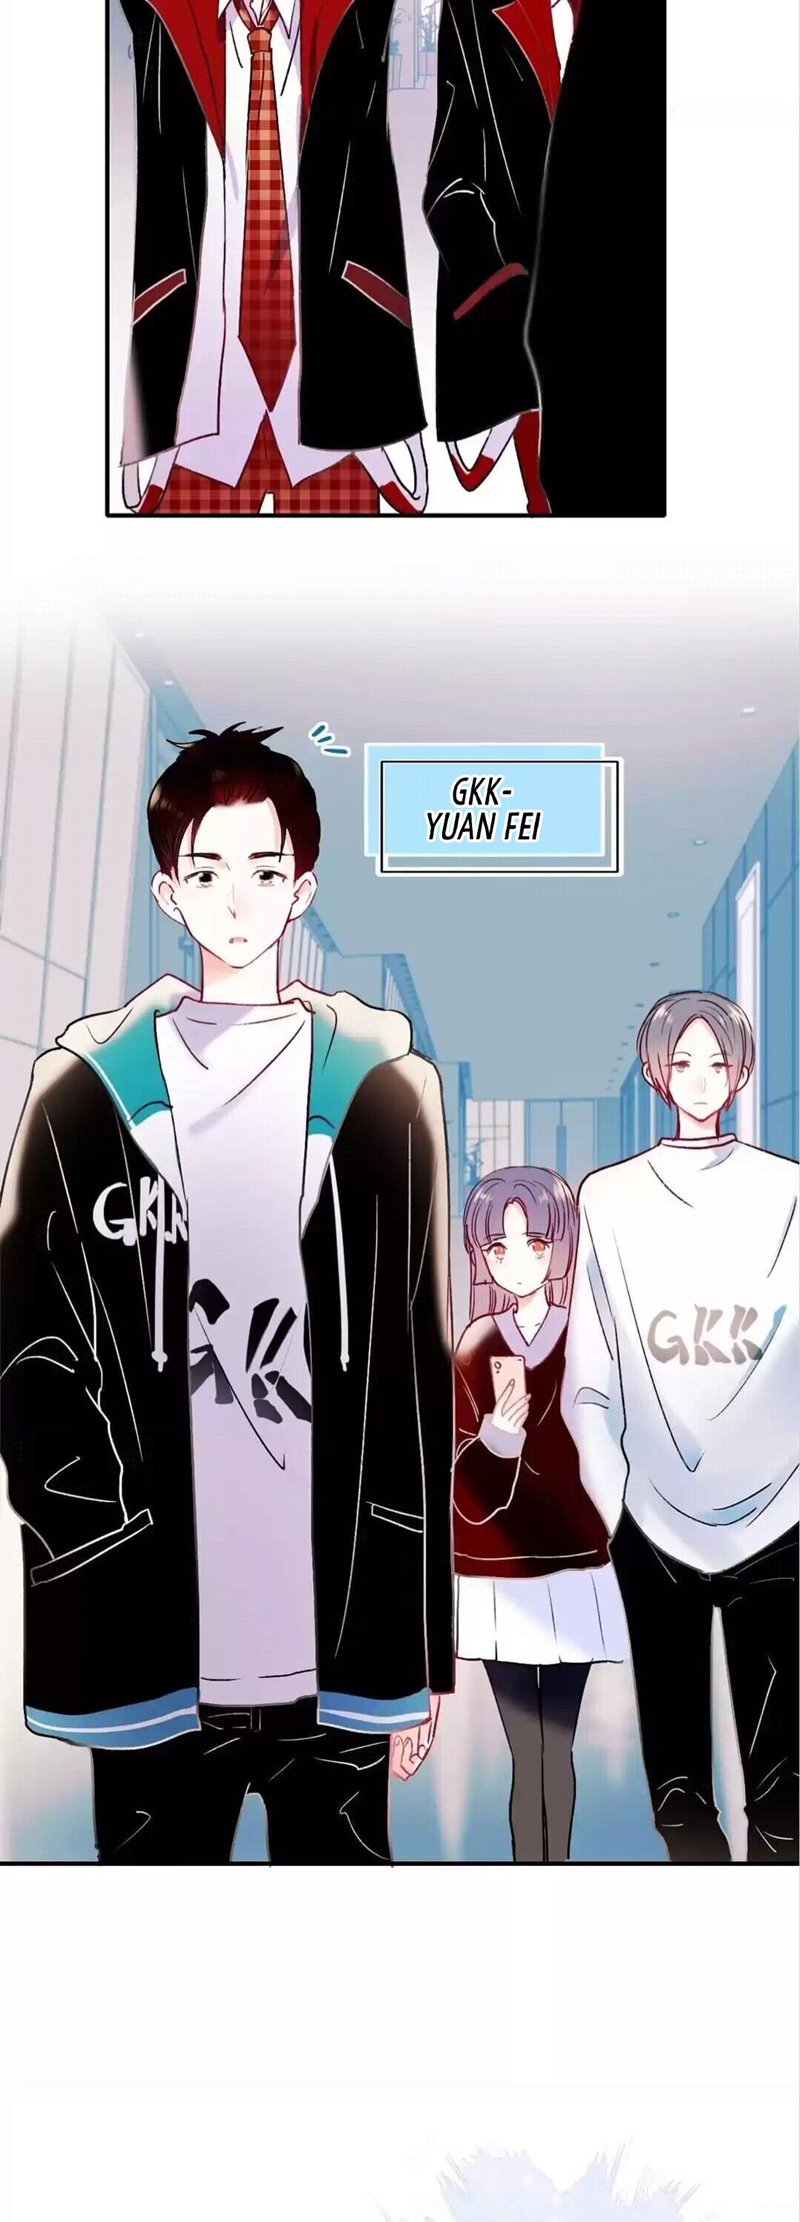 To be Winner Chapter 68